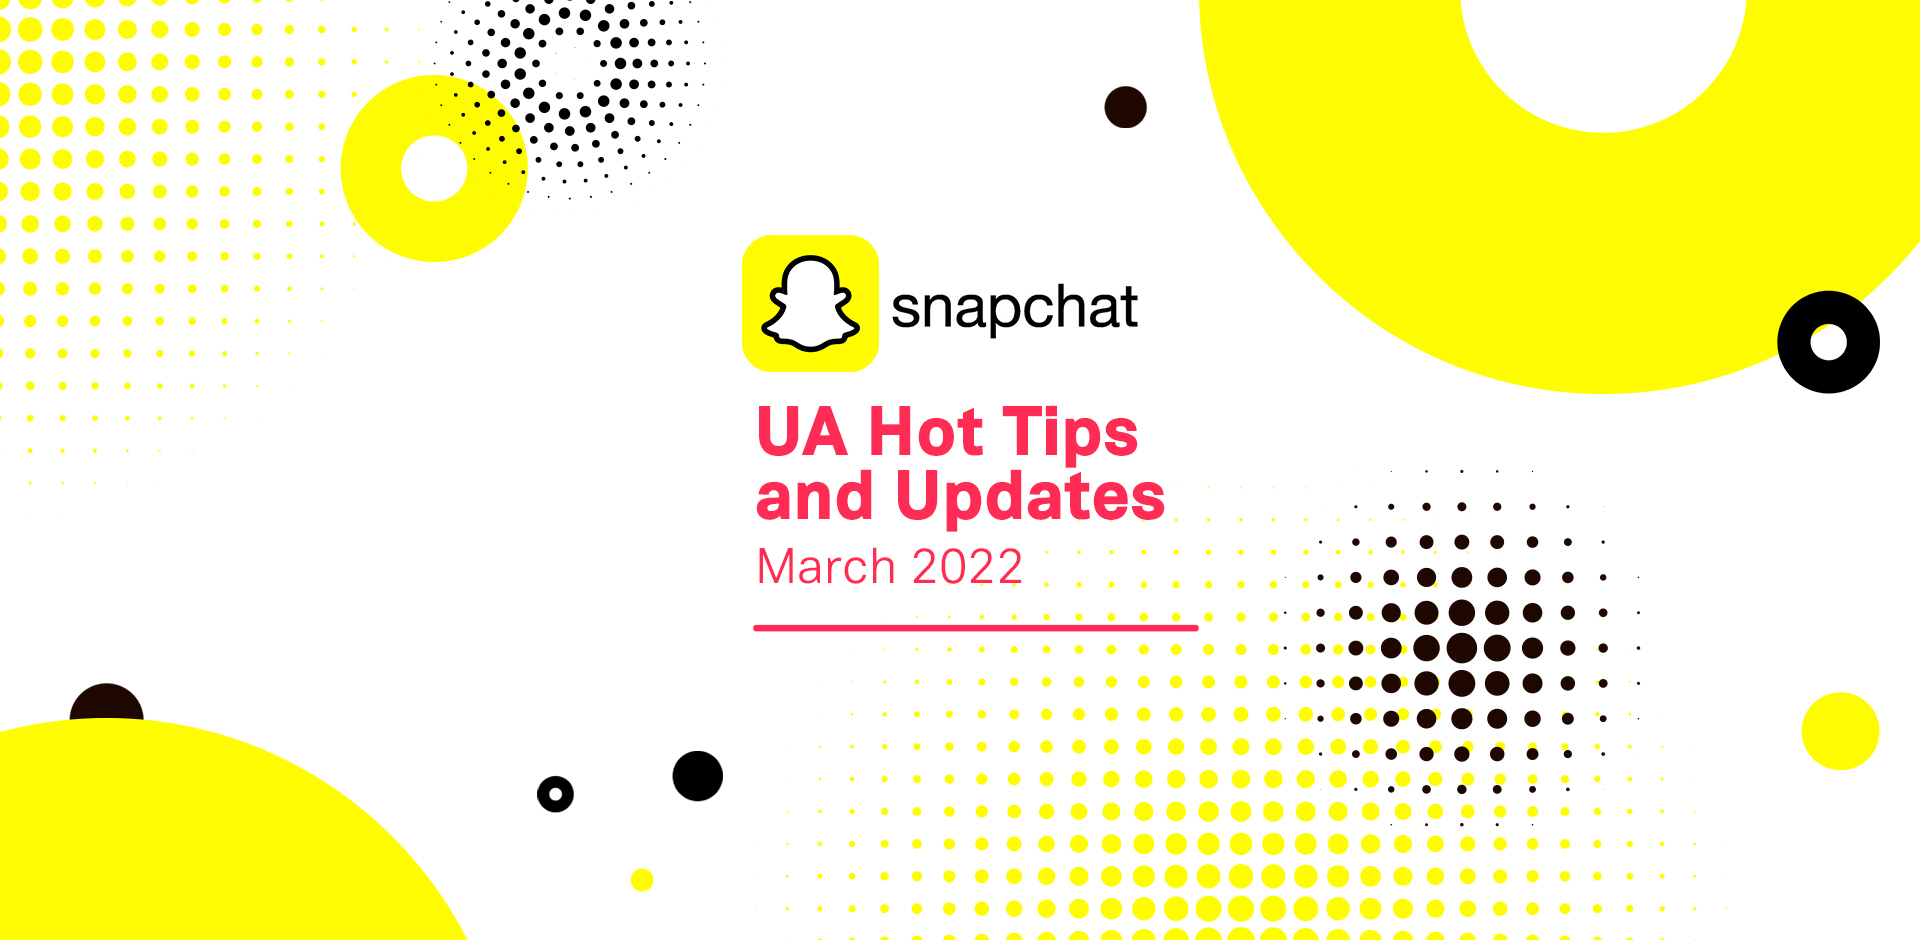 Snapchat UA Hot Tips and Updates for March 2022